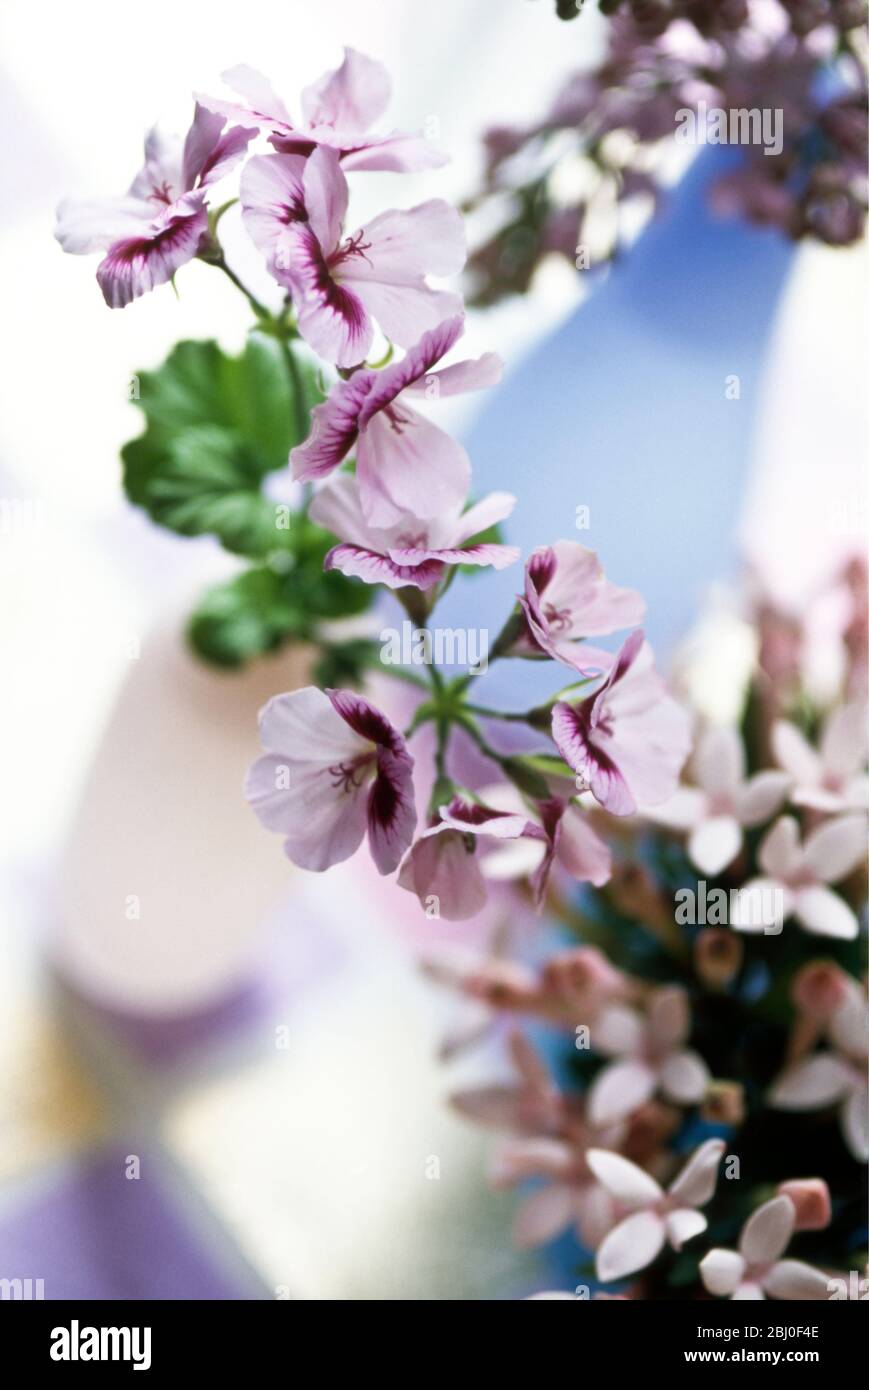 A pretty table arrangement of various mauve and pink small petalled flowers in delicate glass vases on checquered surface - Stock Photo